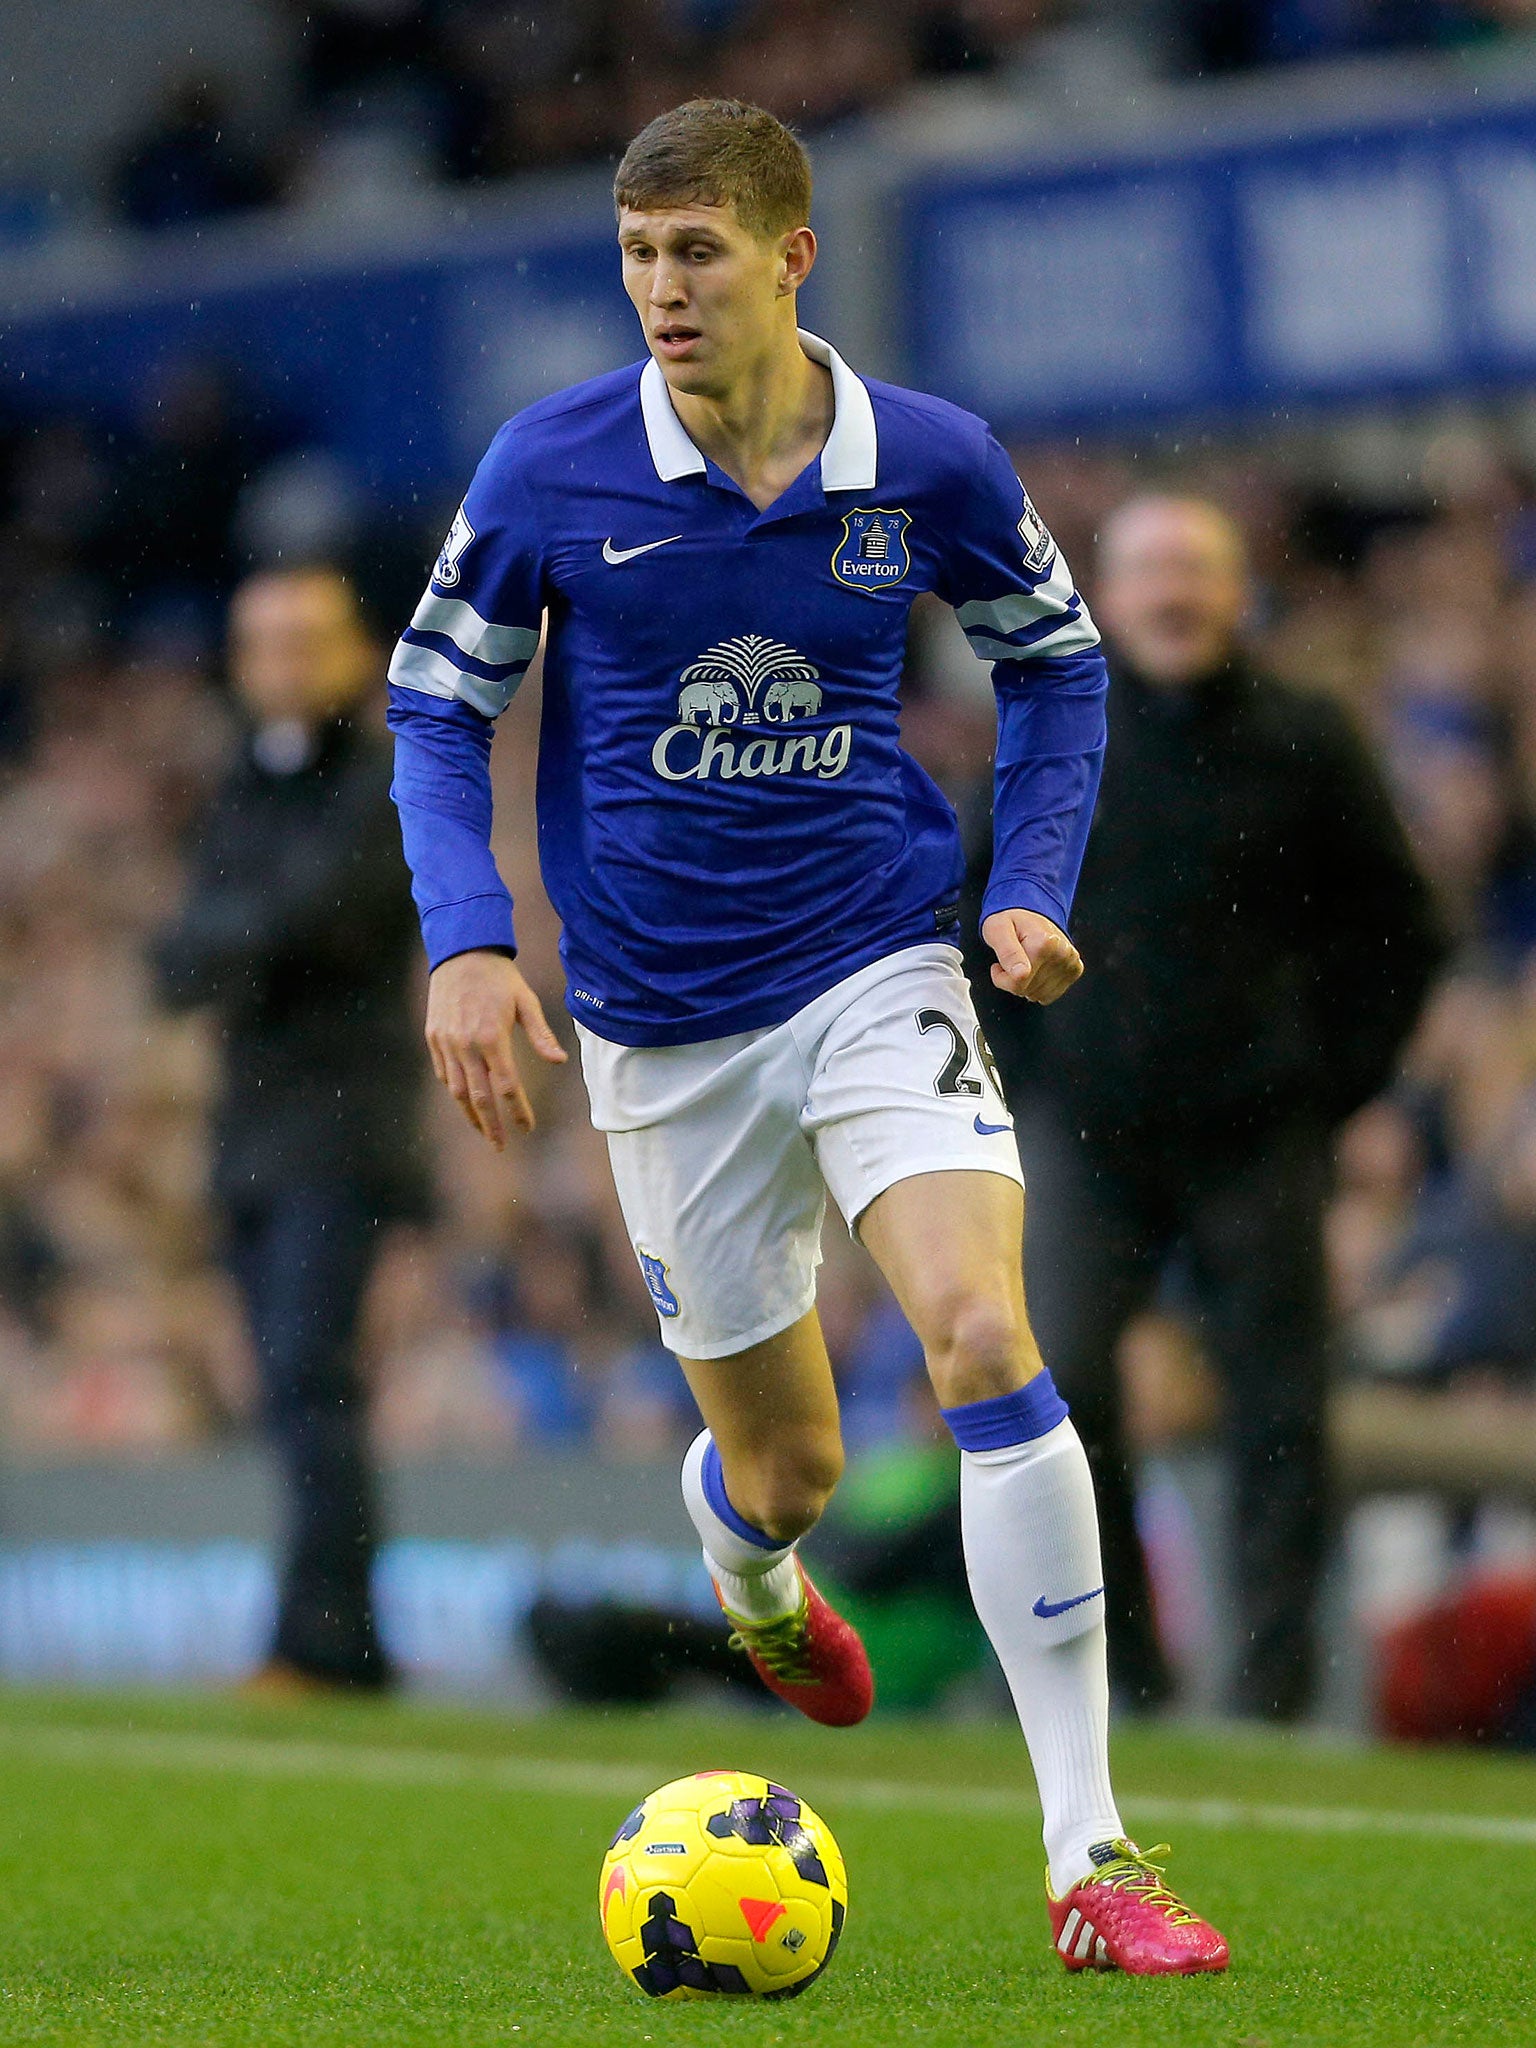 John Stones is looking forward to Everton’s Europa League campaign after signing a new five-year contract